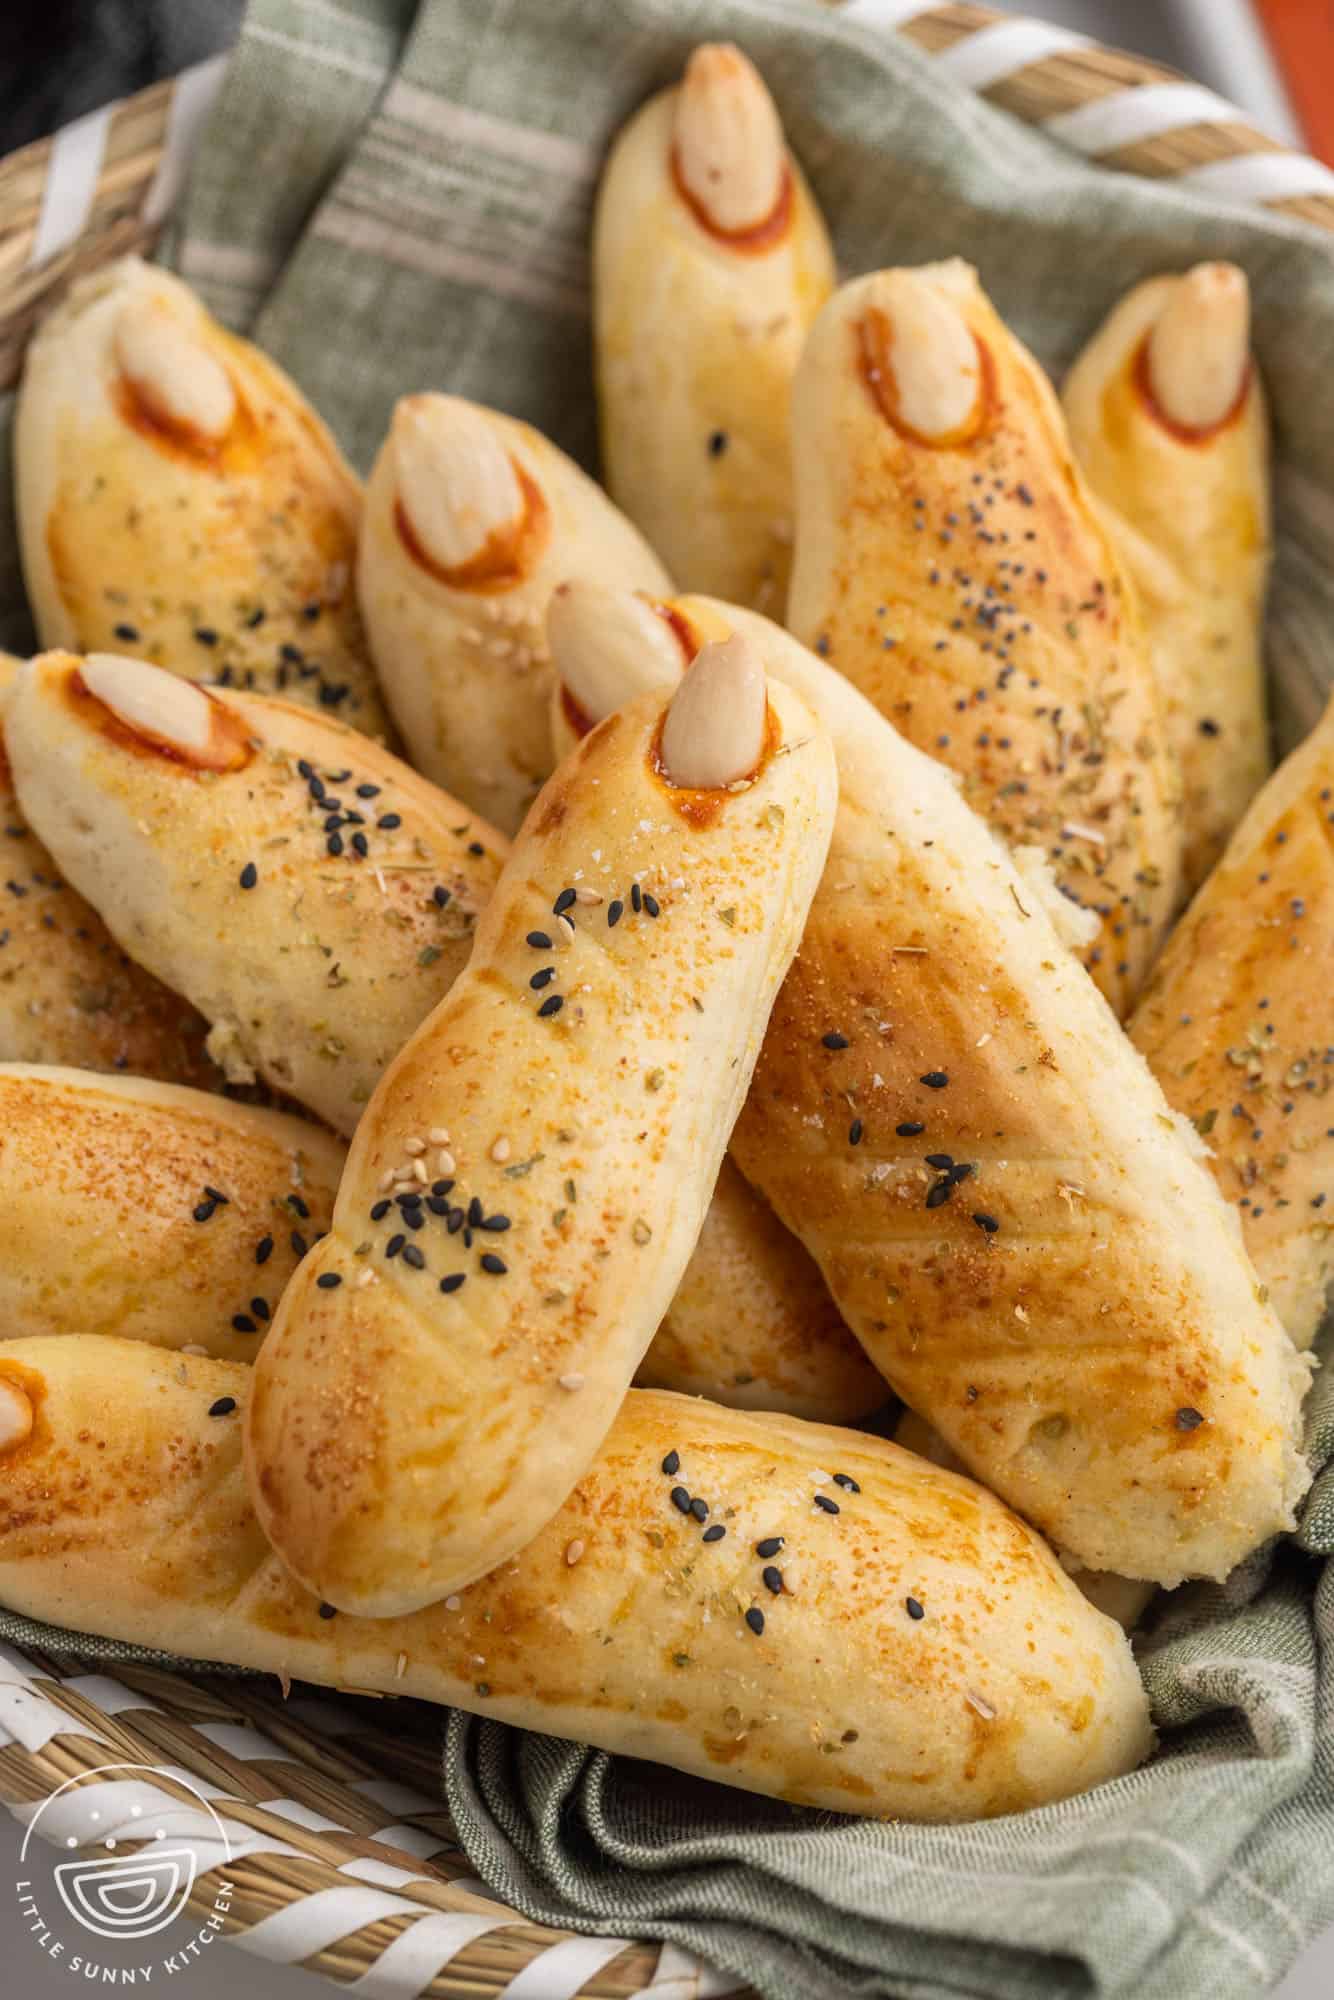 Witches finger breadsticks in a bread basket